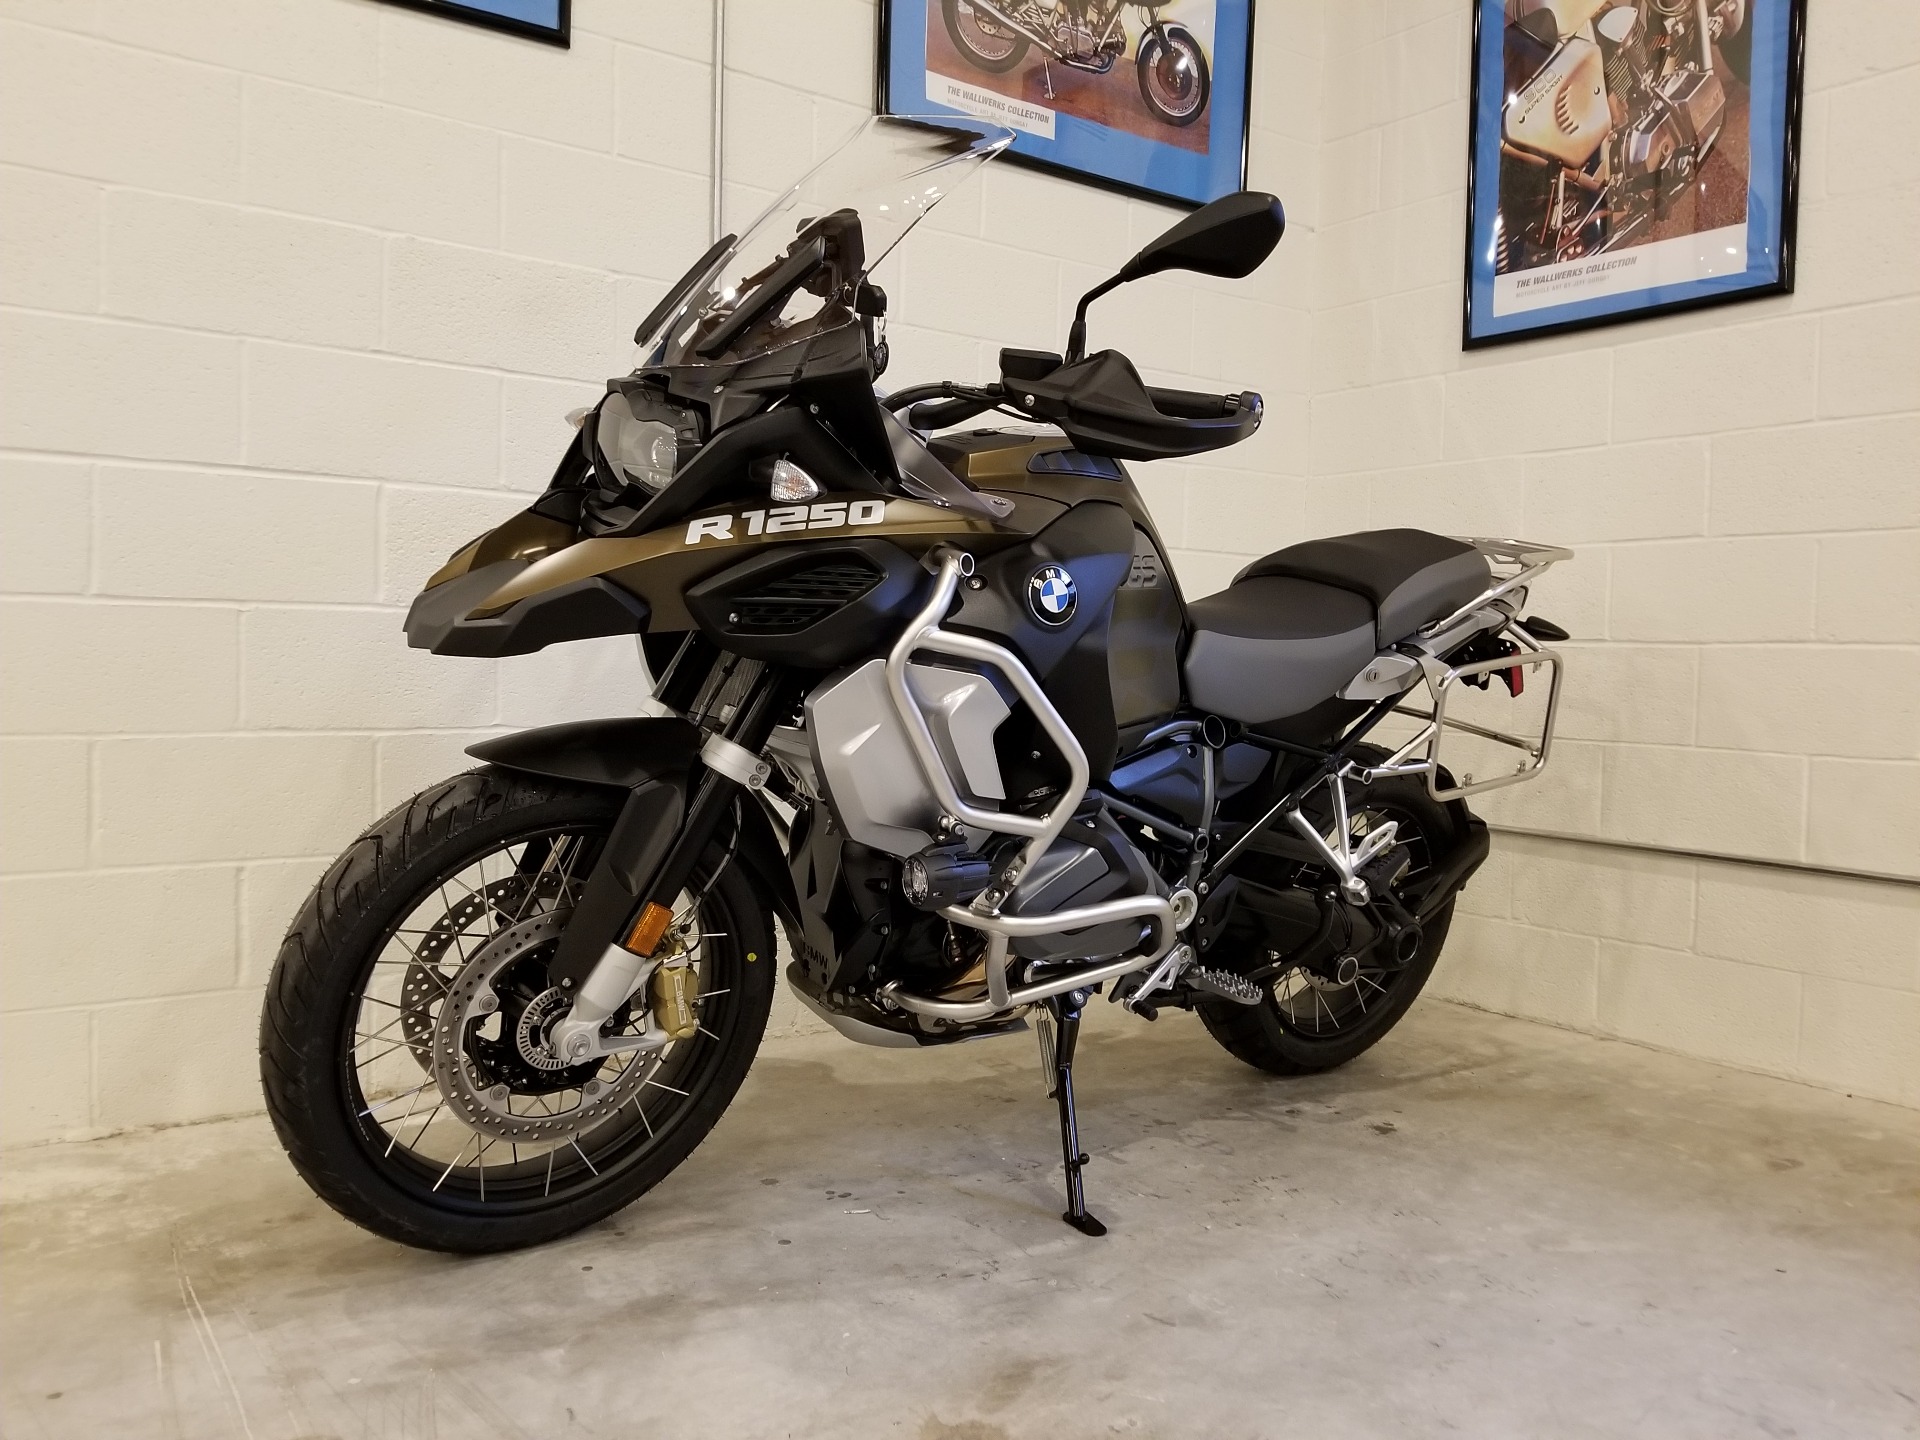 1250 adventure. BMW r1250gs Adventure. BMW GS 1250. BMW GS 1250 Adventure. BMW r1250gs Exclusive.